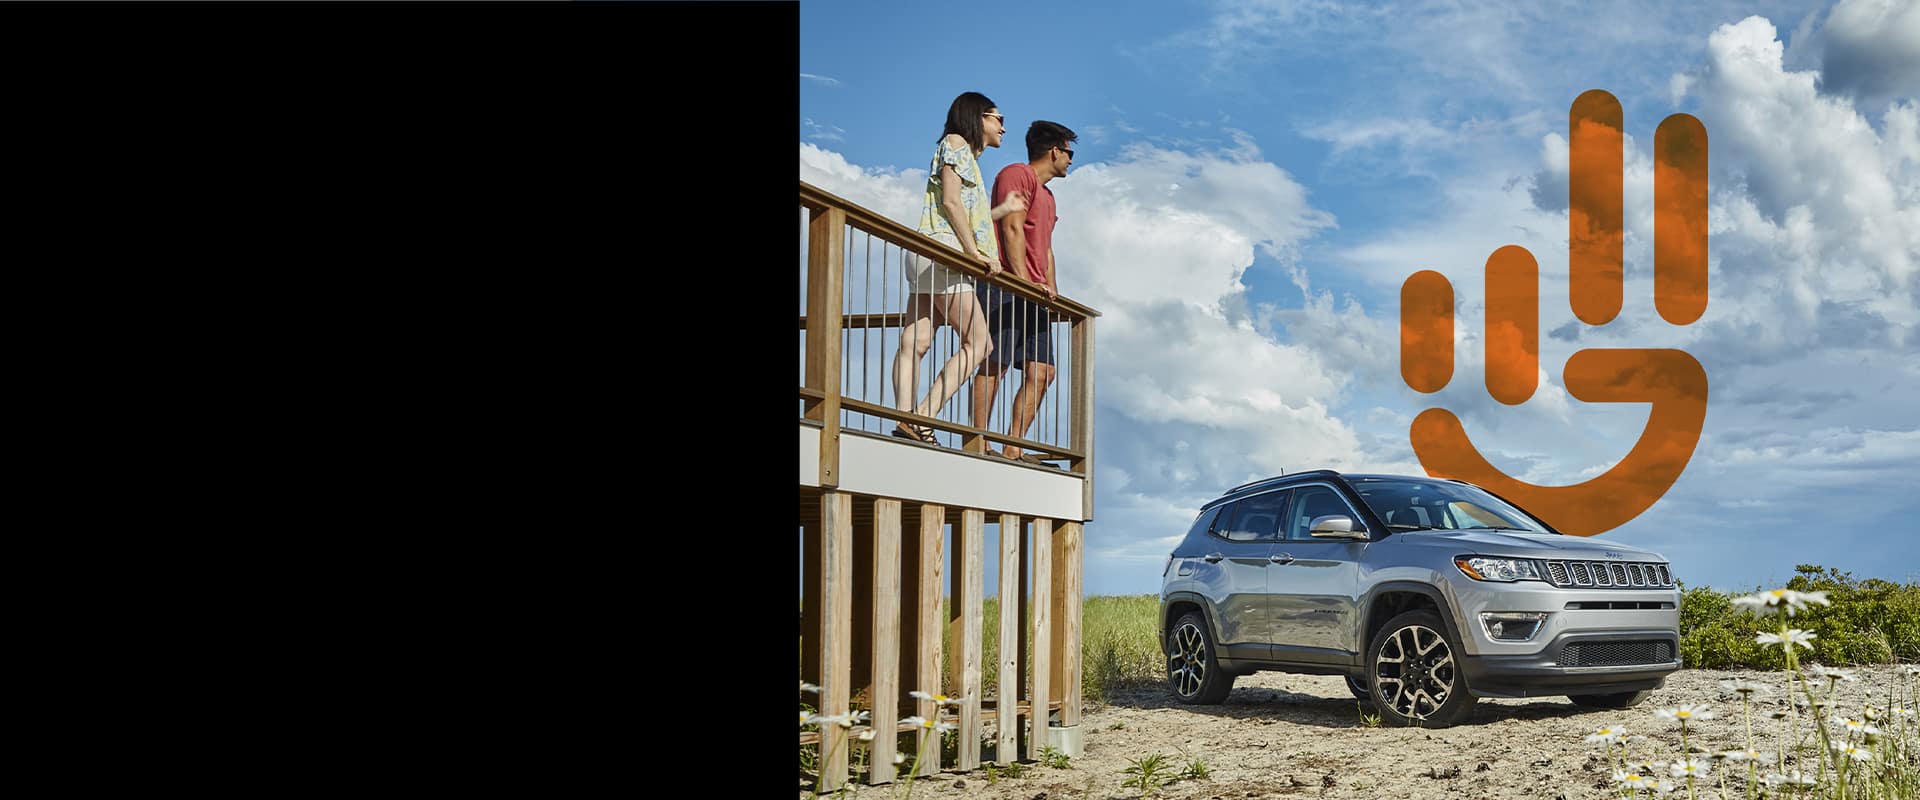 A couple standing on a deck overlooking a parked 2021 Jeep Compass with the Jeep Wave logo superimposed on the image.